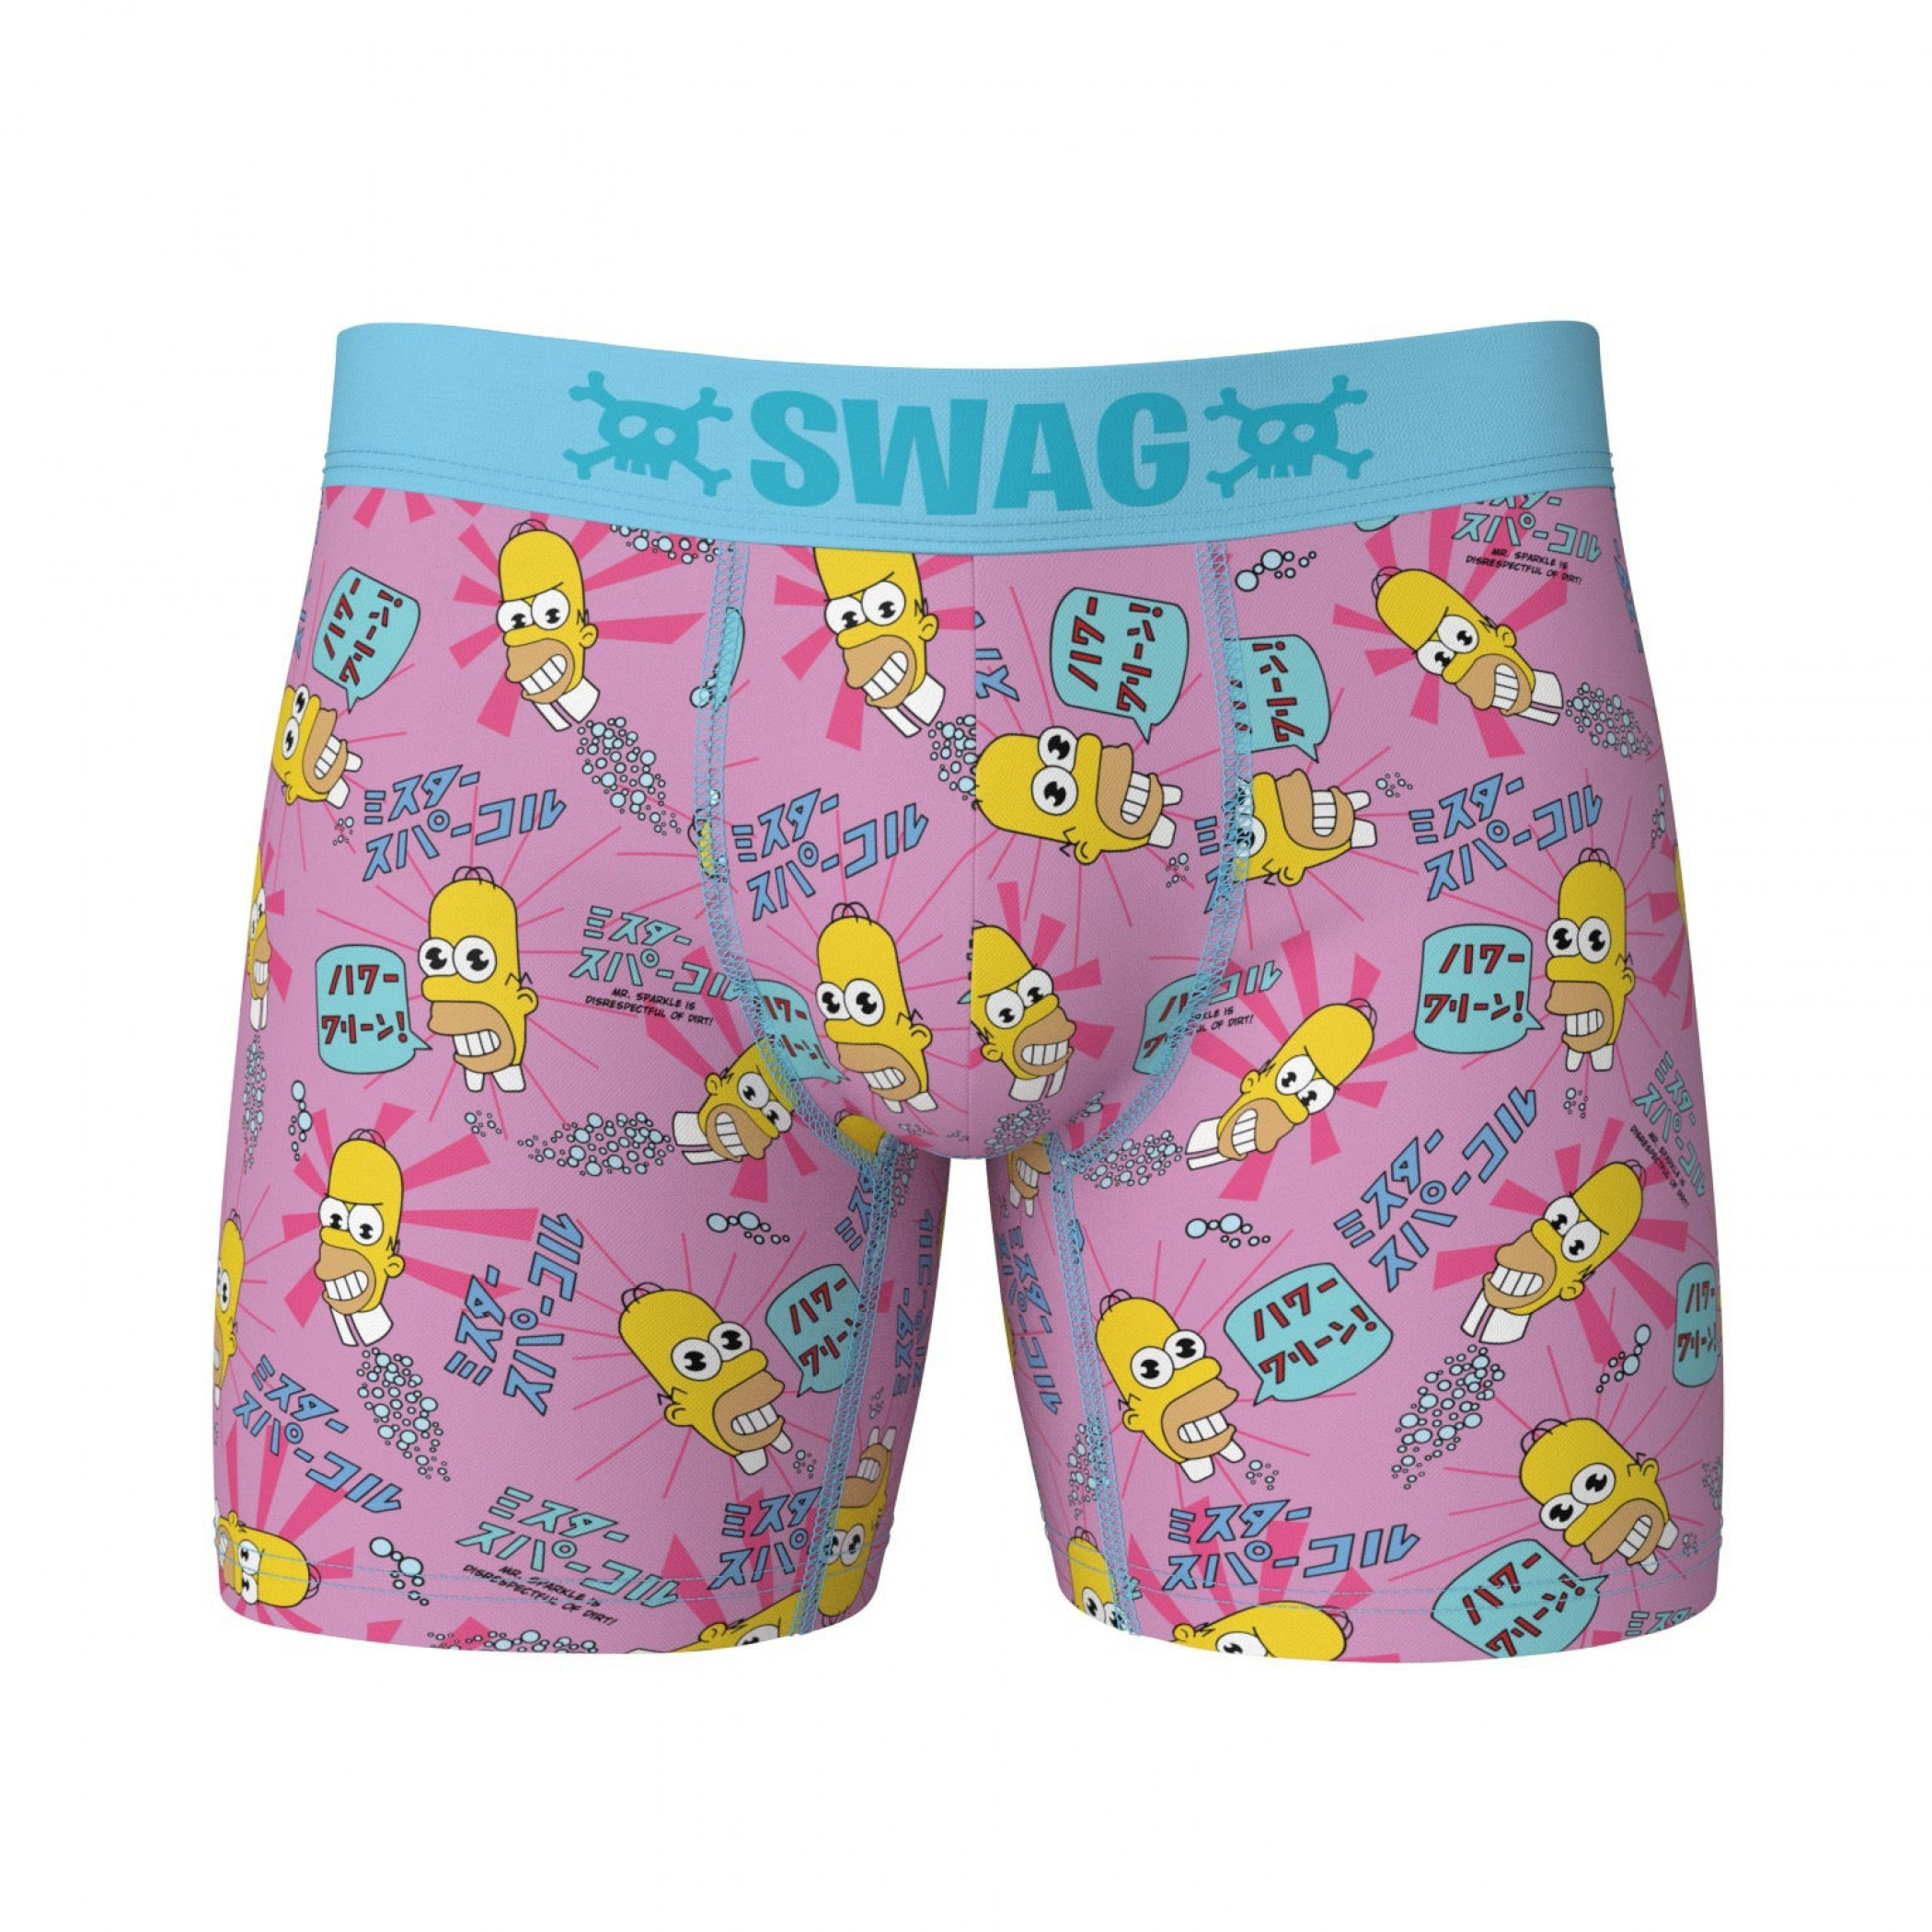 The Simpsons Homer Mr. Sparkle Swag Boxer Briefs